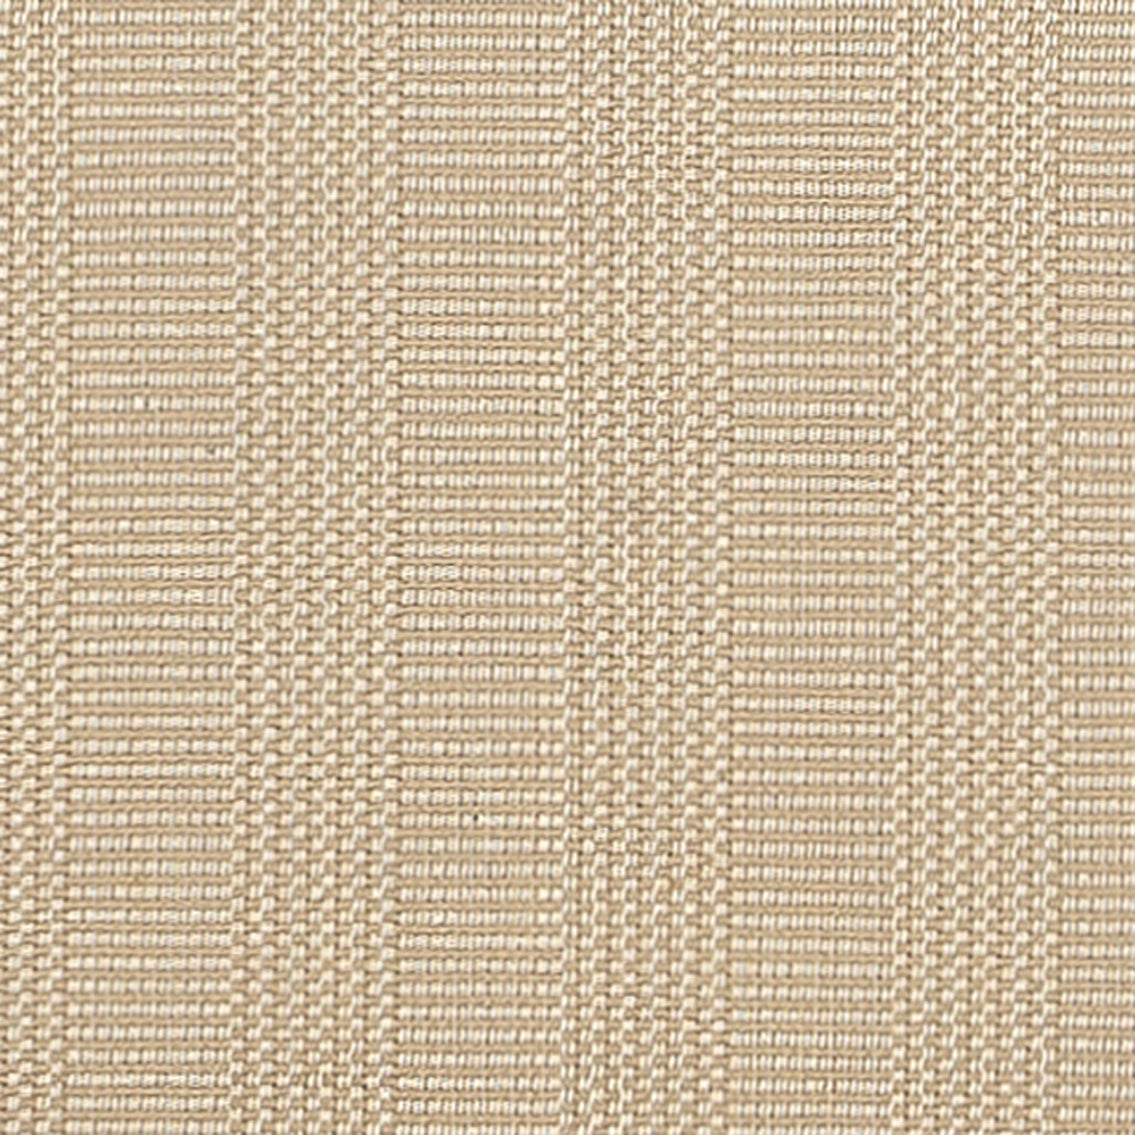 Natural and beige special weave design available in virtually every size from runners to room size area rugs. A great way to stay neutral with style. Often used in coastal homes thanks to the sandy, beach like feel of the special weave.